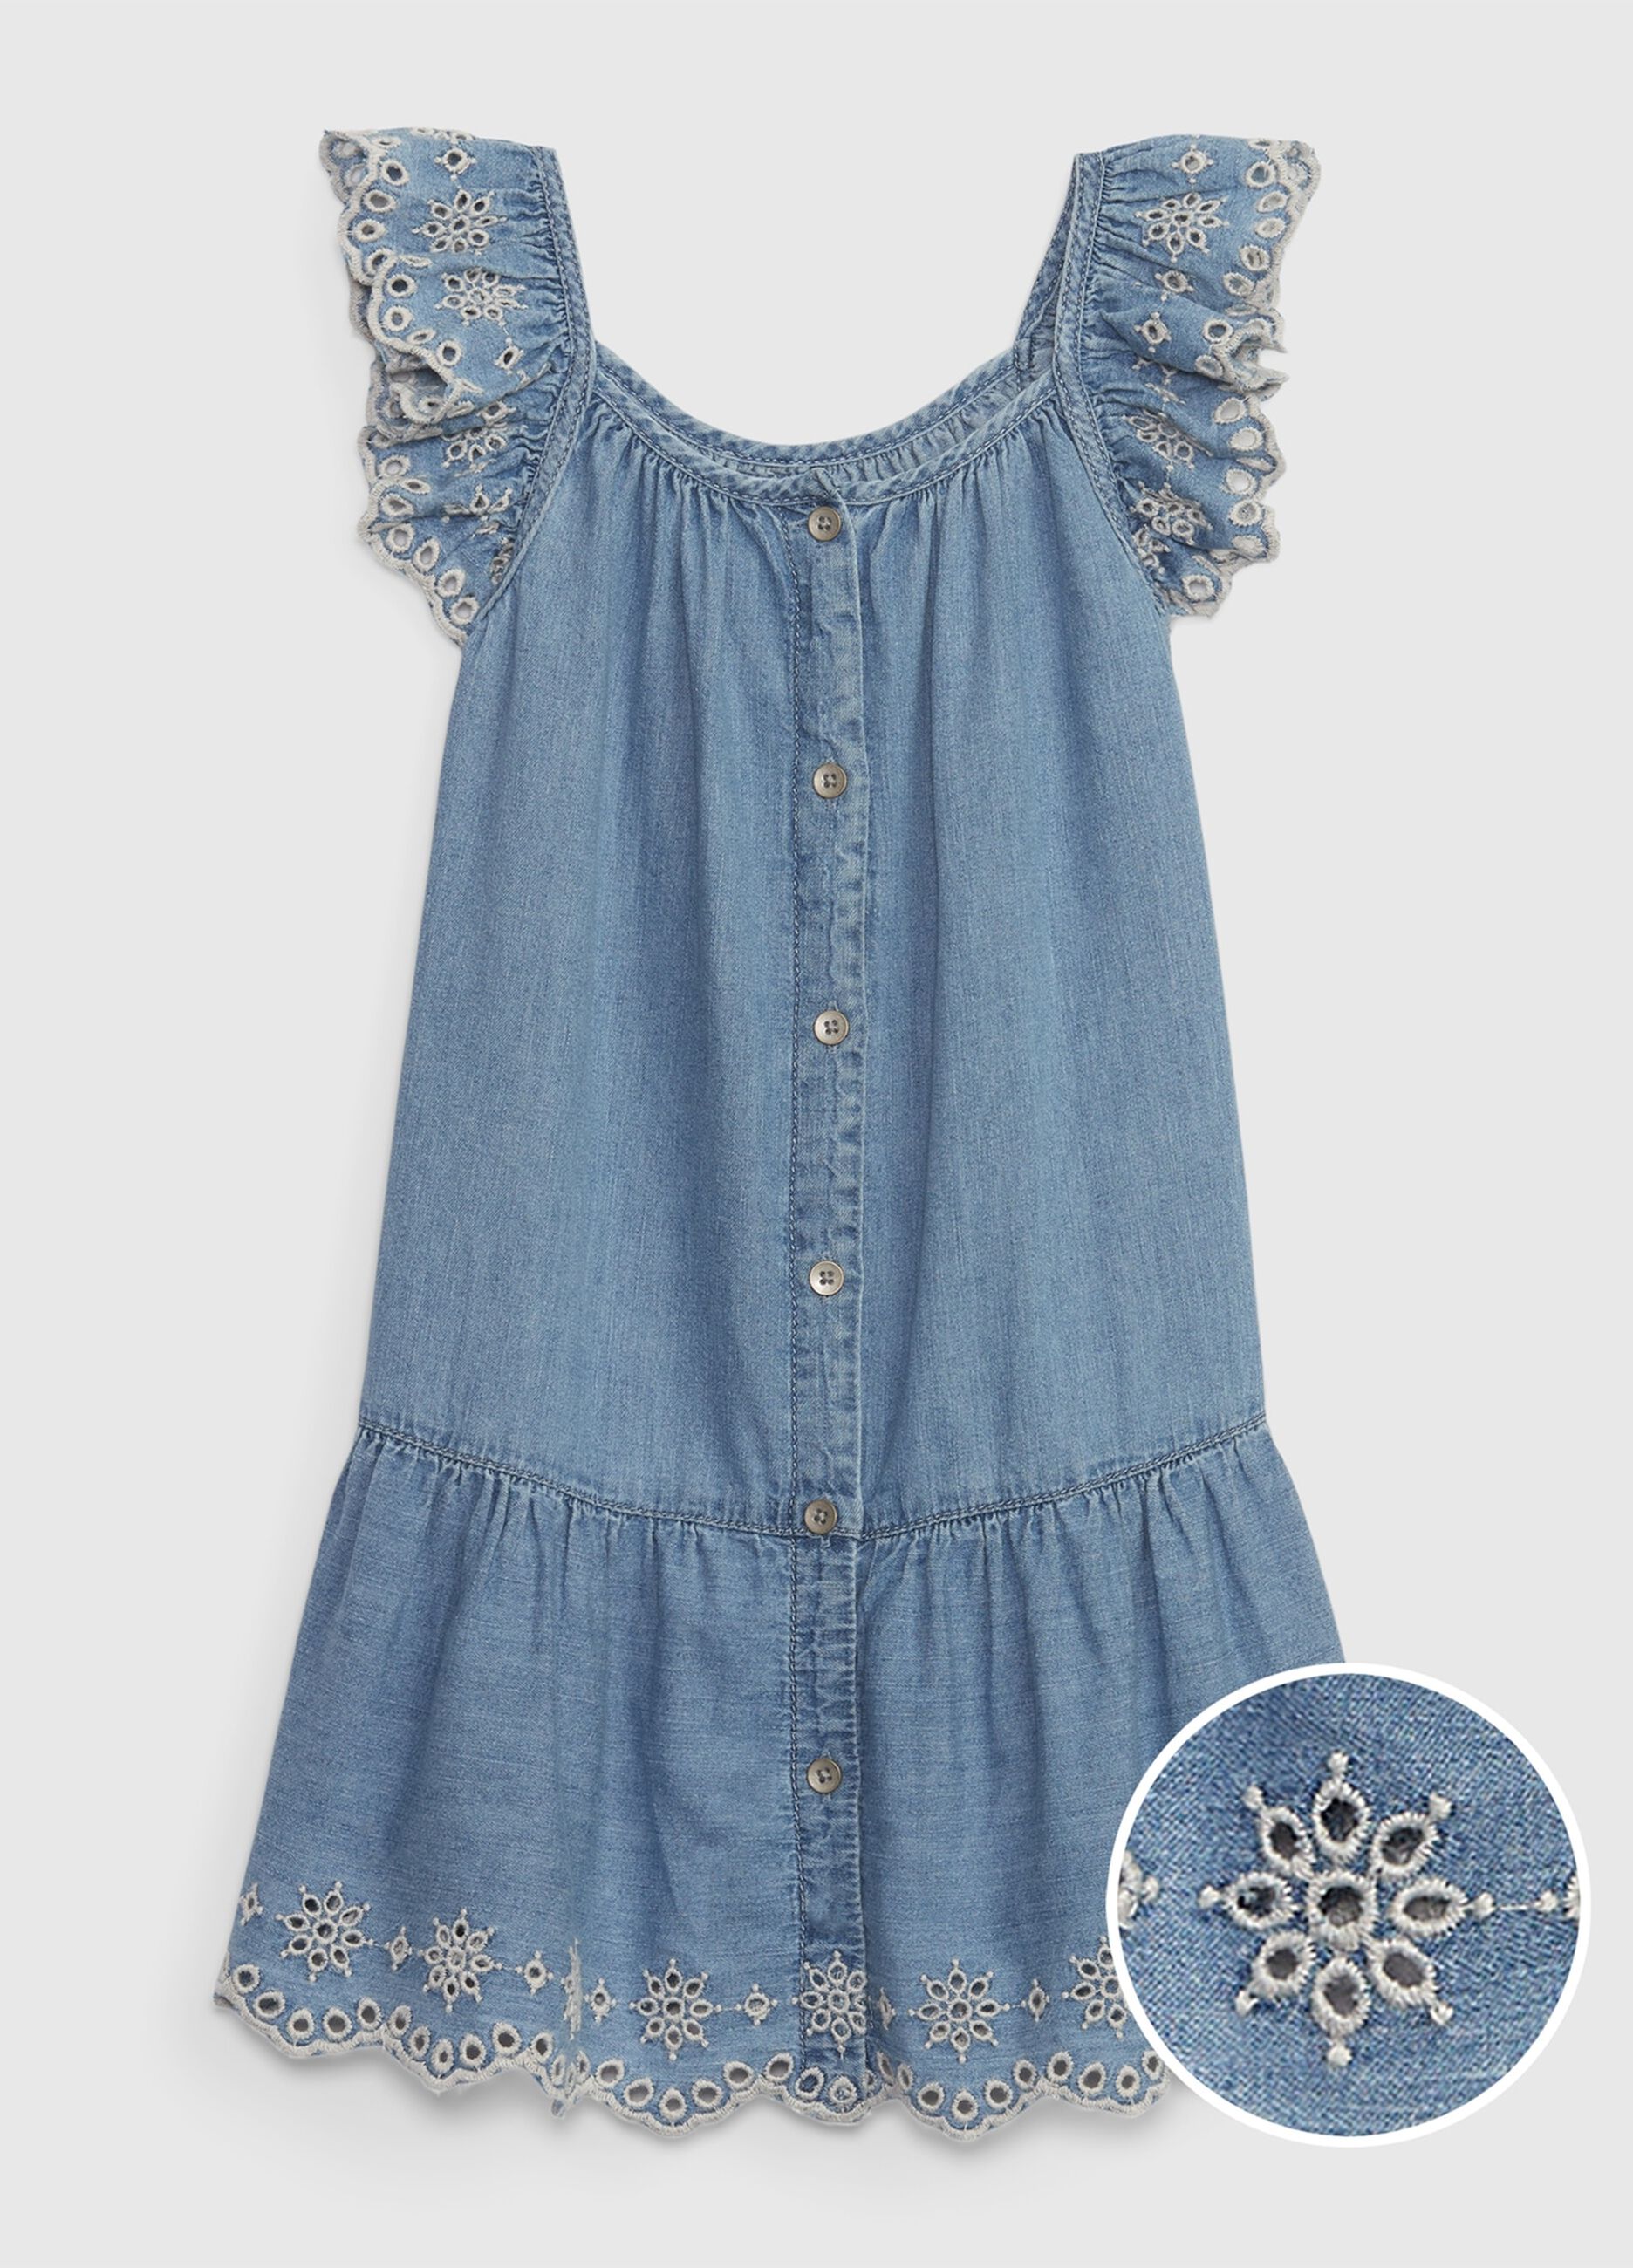 Long dress in denim with broderie anglaise